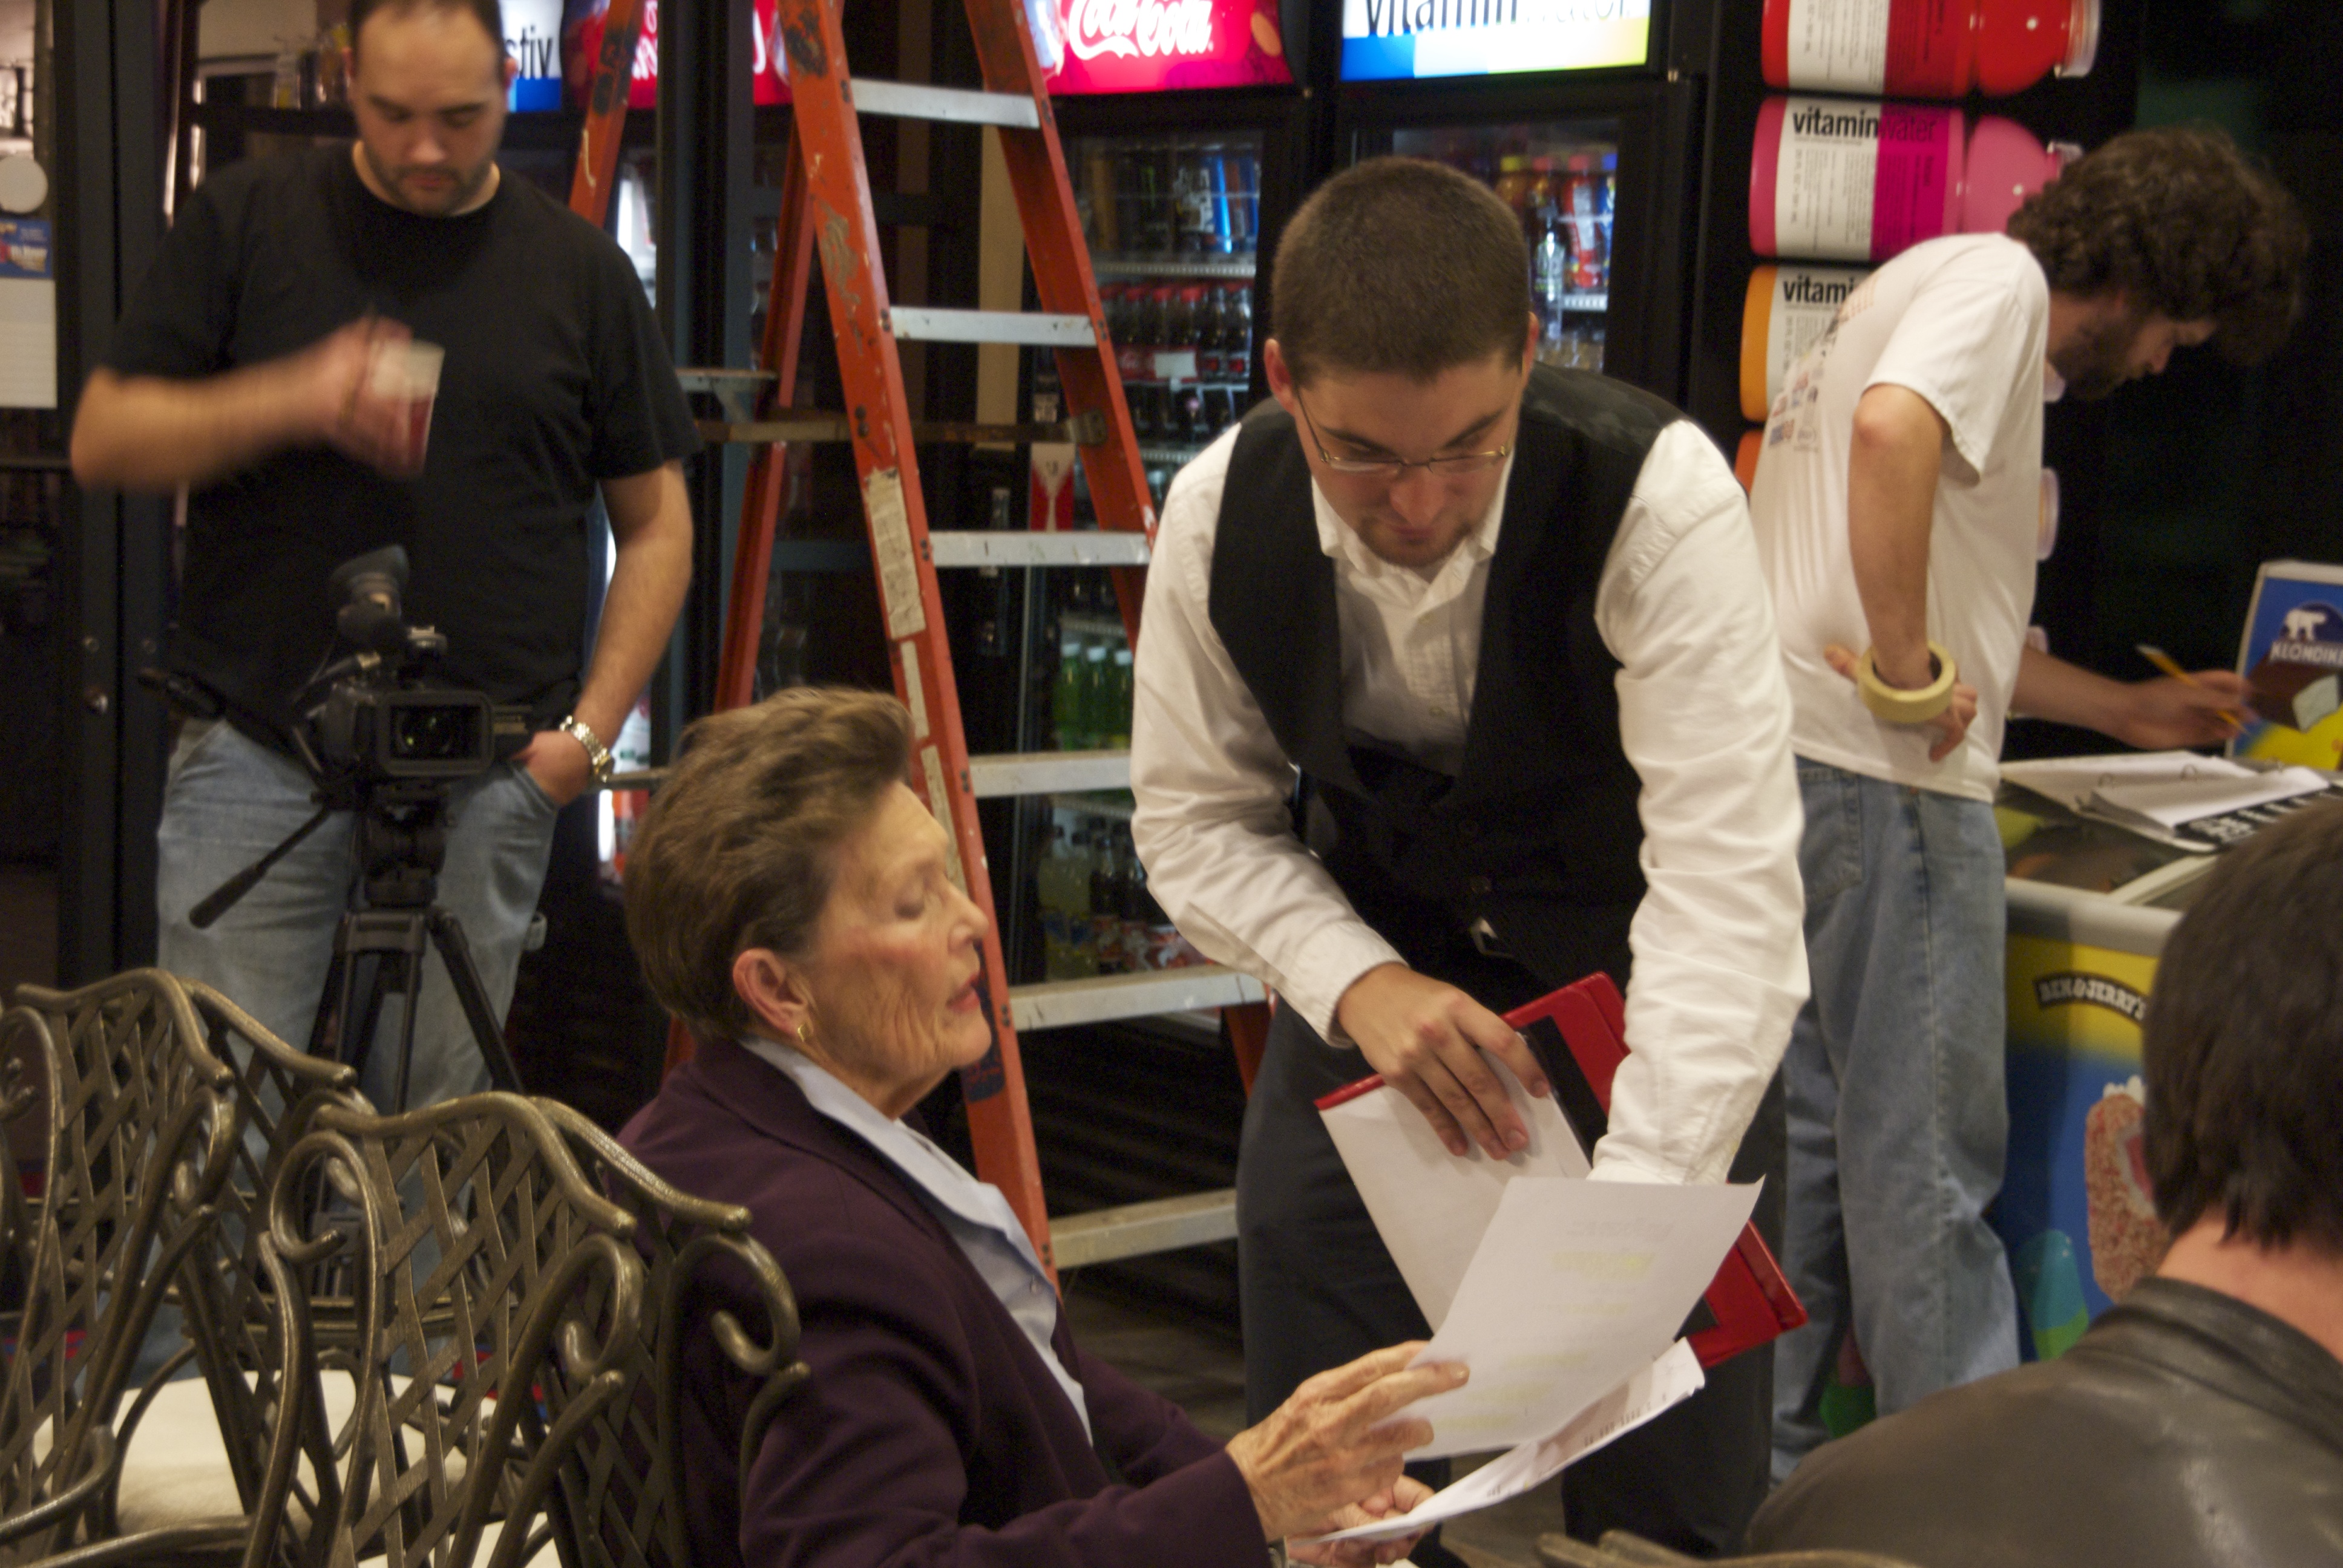 Director James Kicklighter with Actress Edith Ivey on the set of 